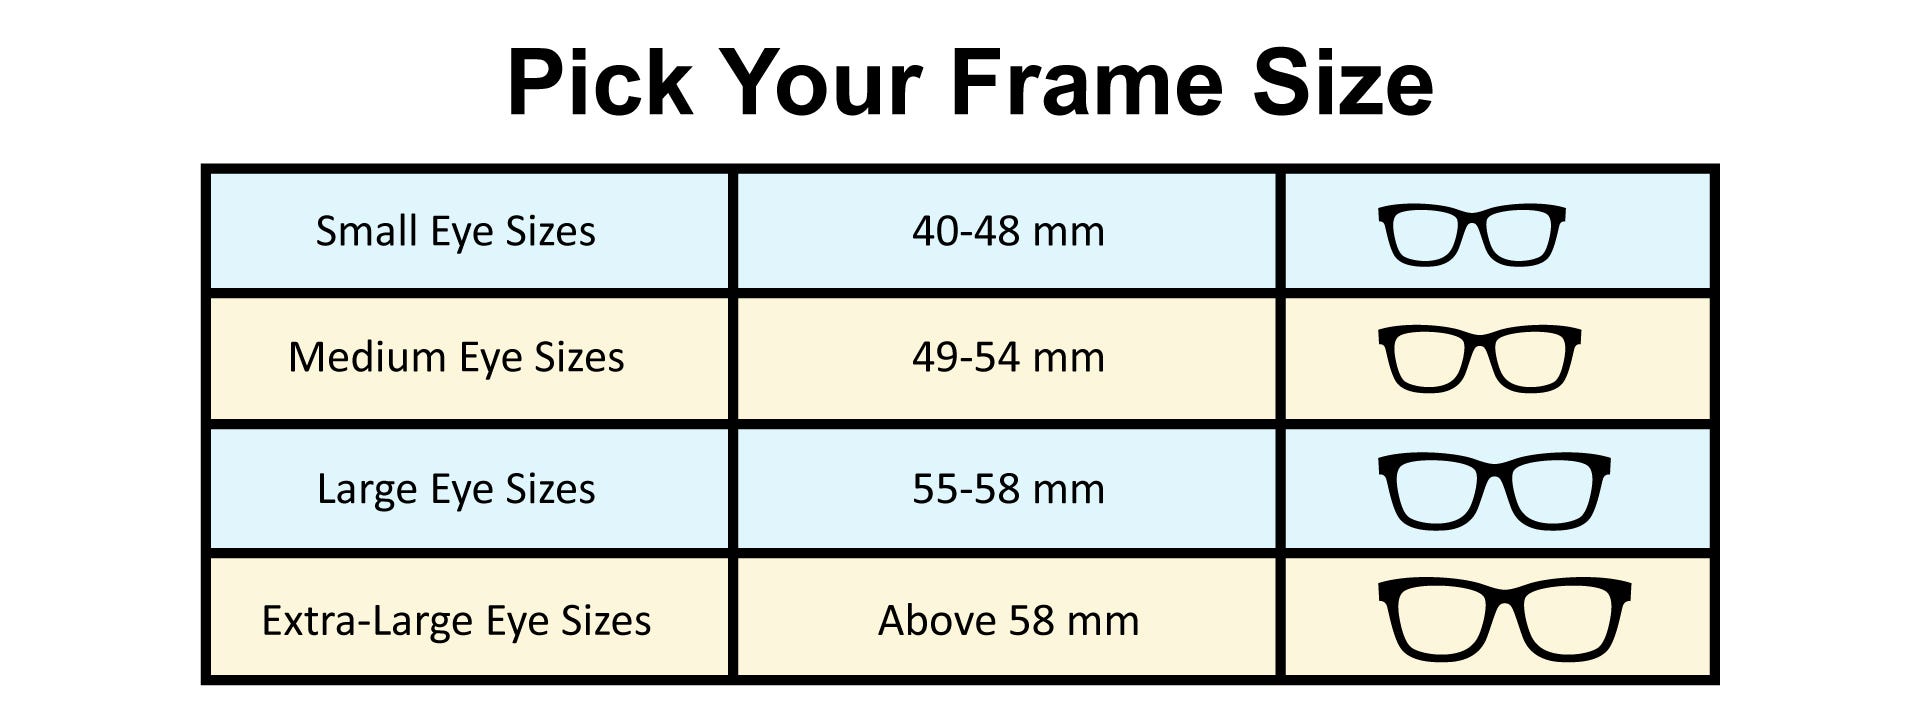 small frame size